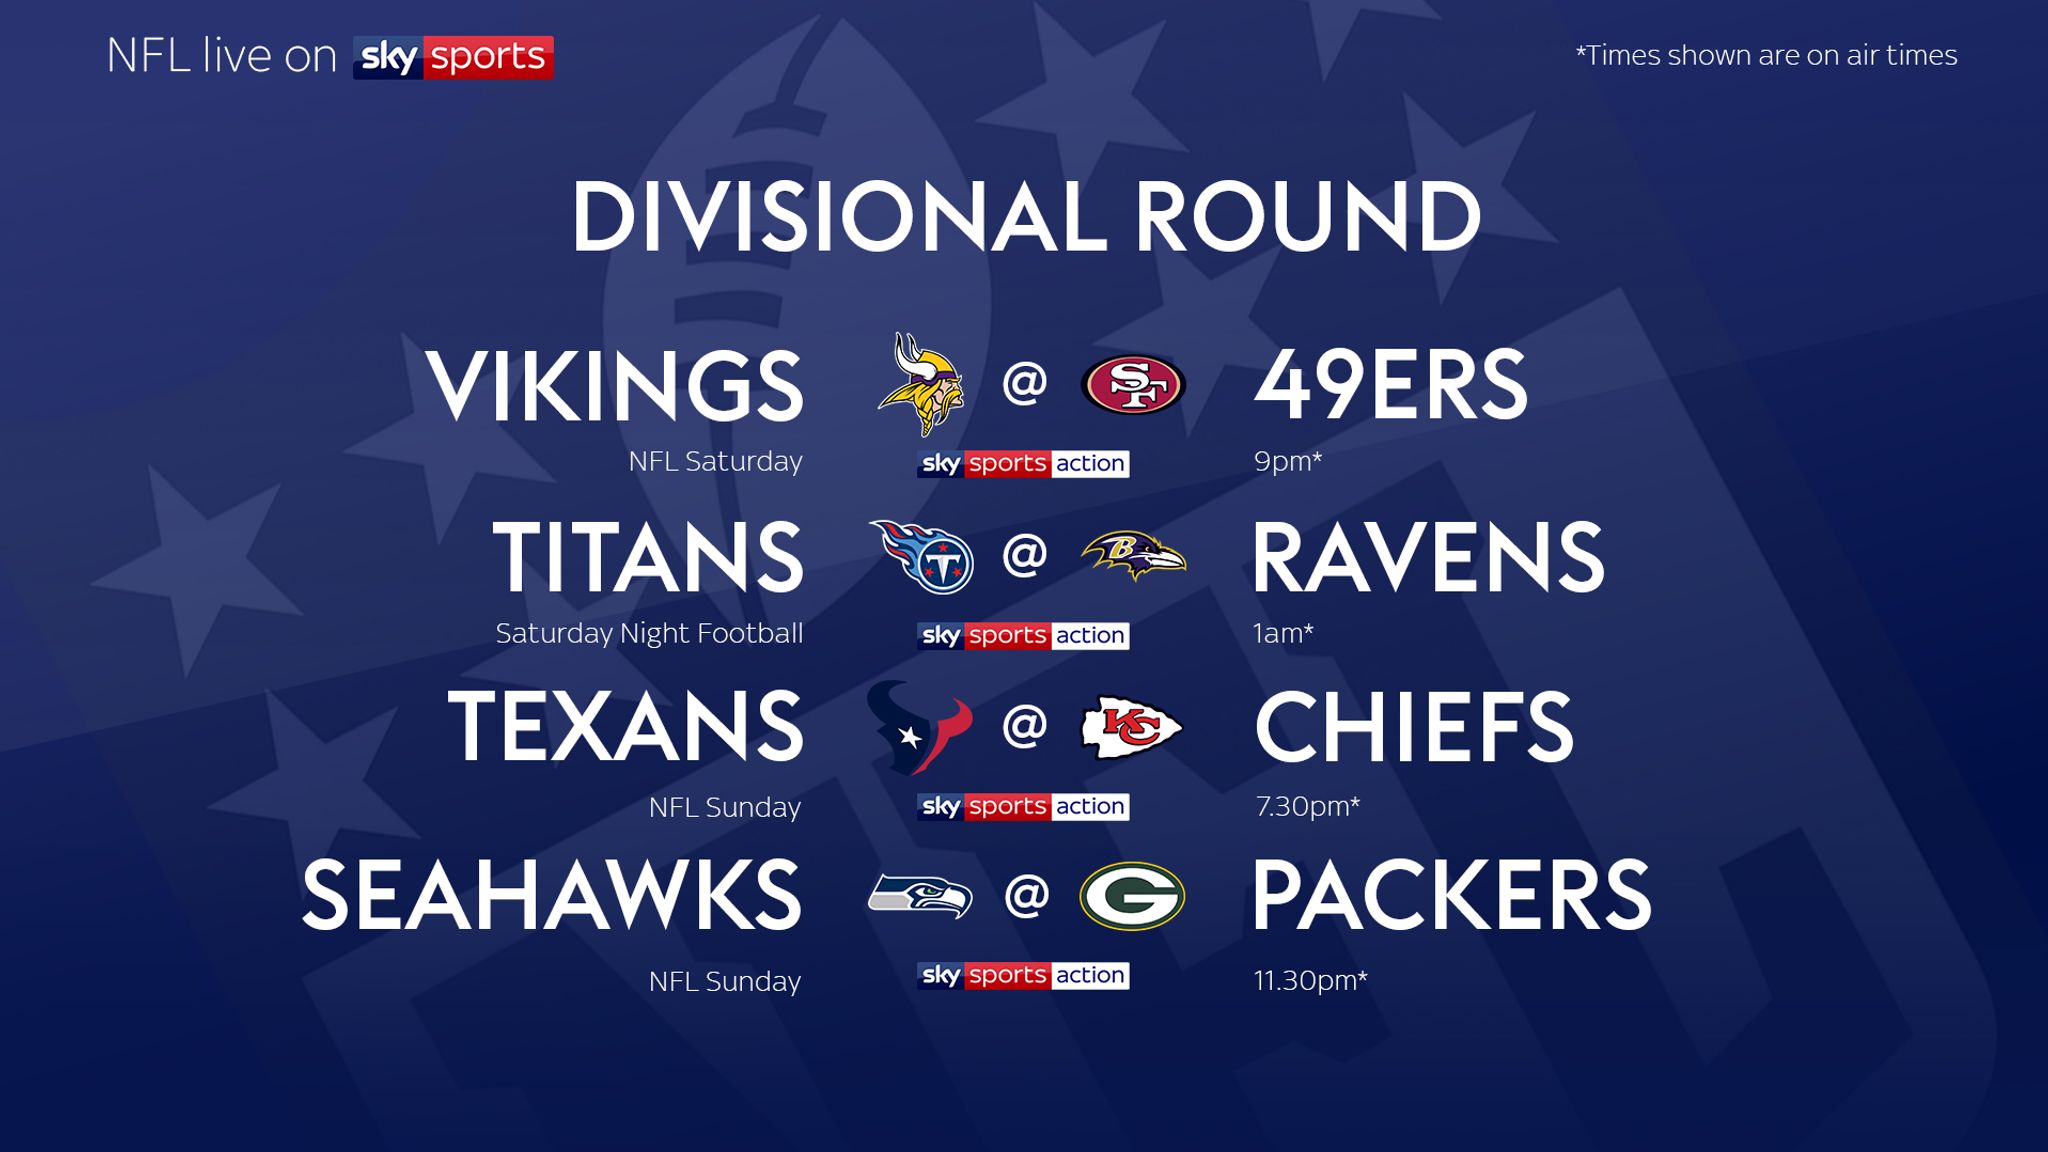 NFL playoffs continue with Divisional Round on Sky Sports, NFL News